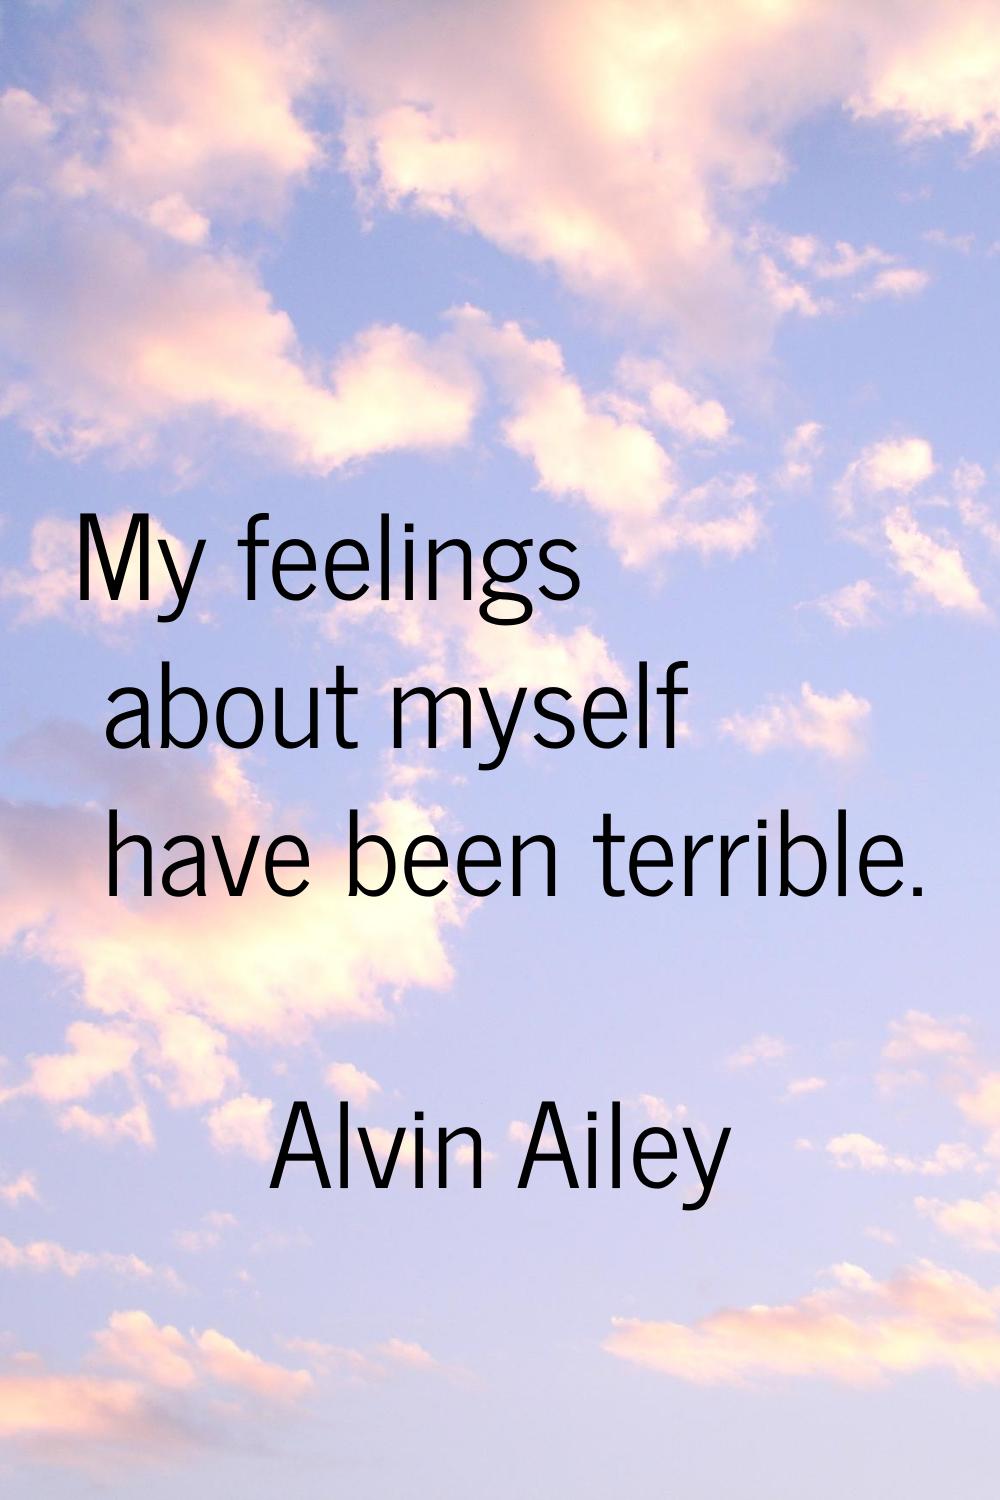 My feelings about myself have been terrible.